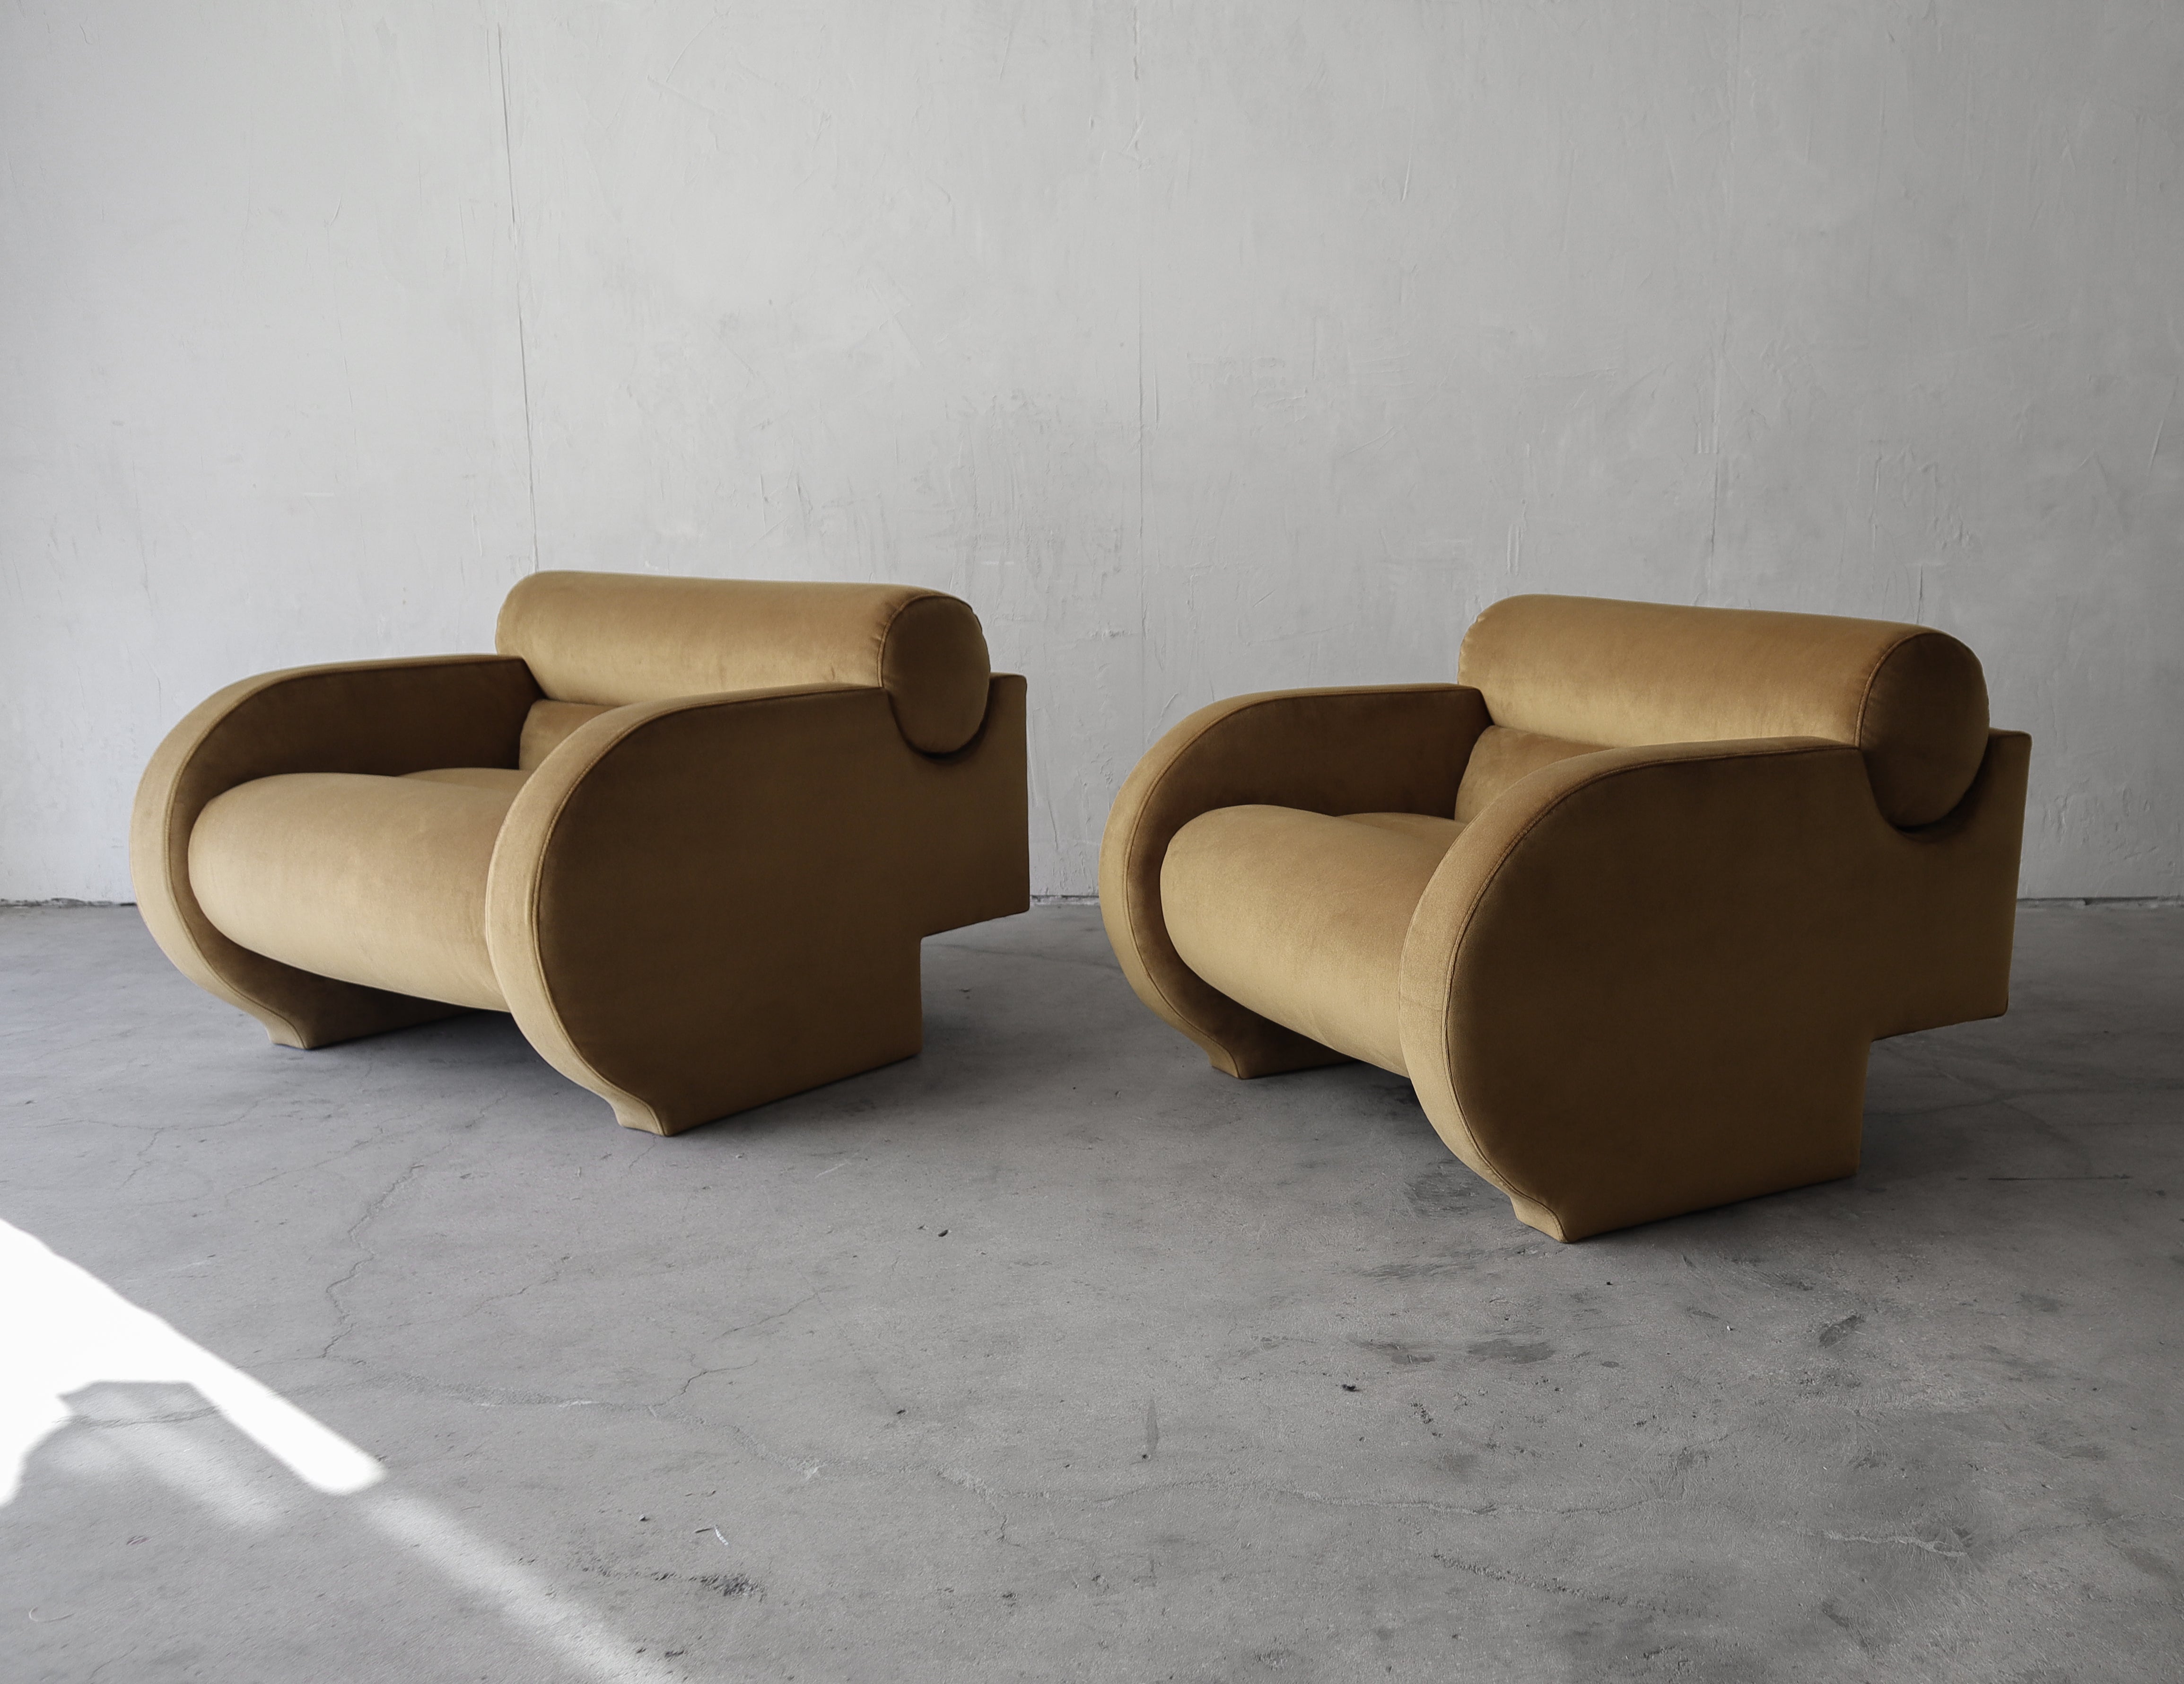 Iconic Vladimir Kagan for Directional lounge chairs as seen on Page 147 of Vladimir Kagan: A Lifetime of Avant-Garde.  

These chairs are RARE and incredible.  I don't think I've seen a more uniquely designed pair of lounge chairs.  The chair is